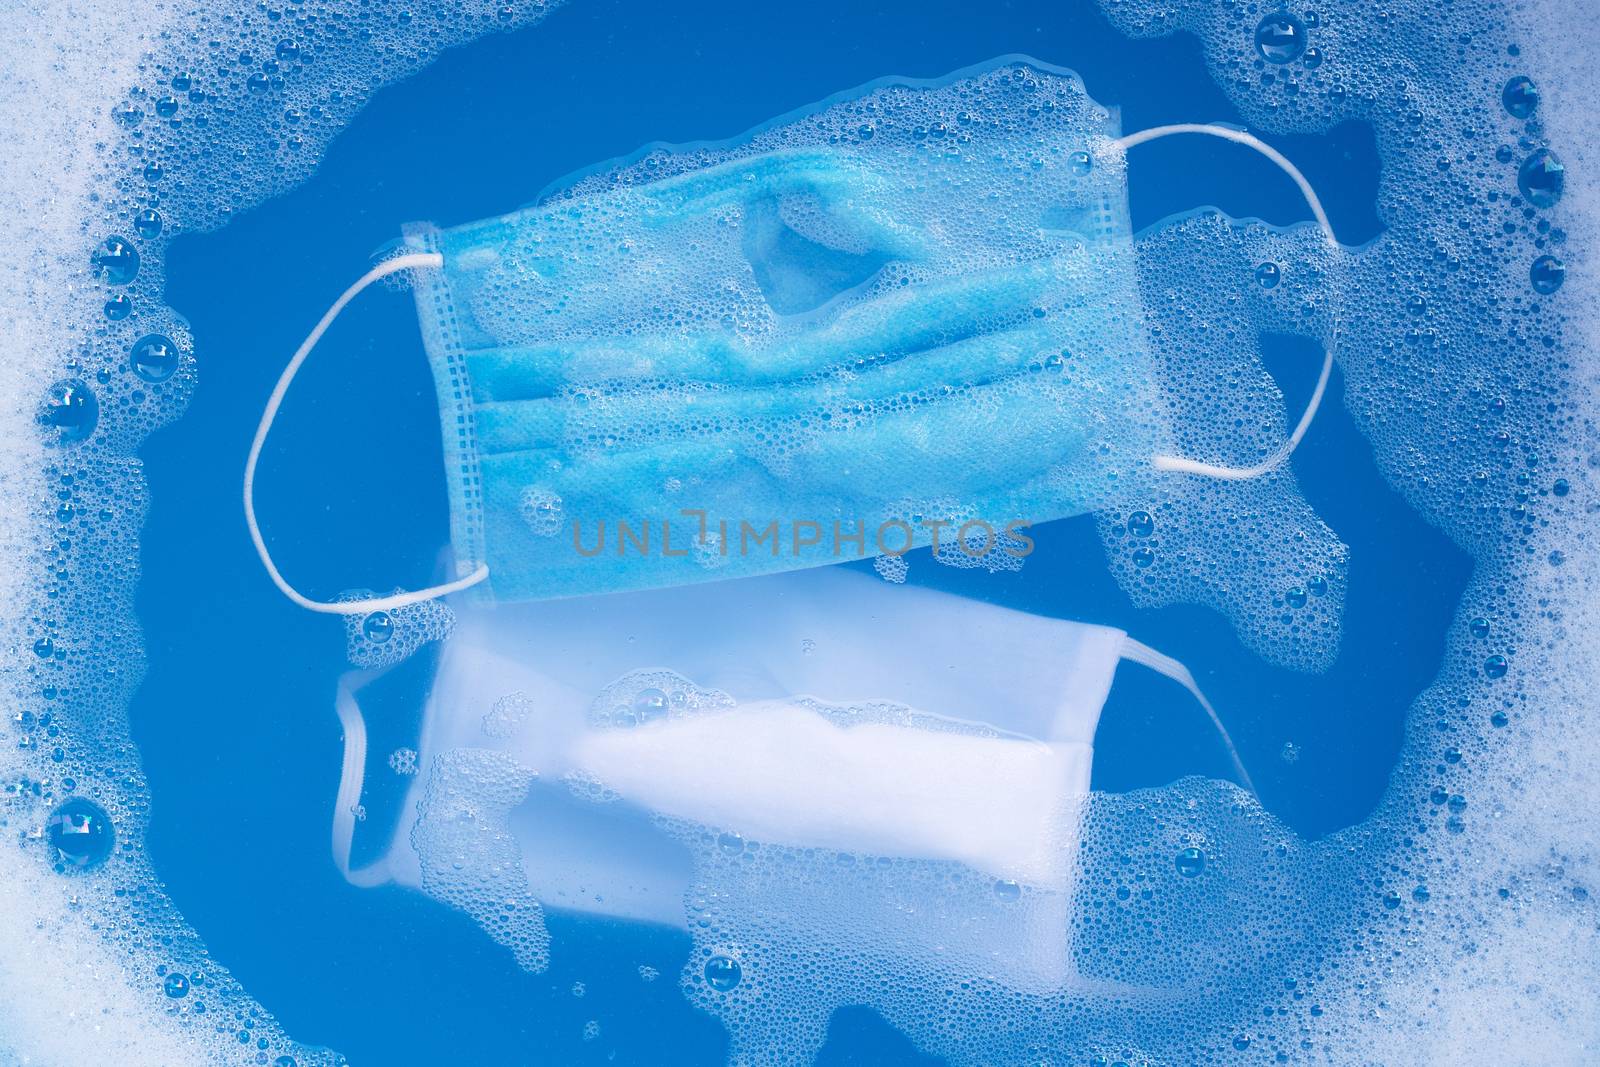 Protective medical mask with cloth mask soak in powder detergent water dissolution before washing. Hygiene coronavirus (Covid-19) protection concept. Top view